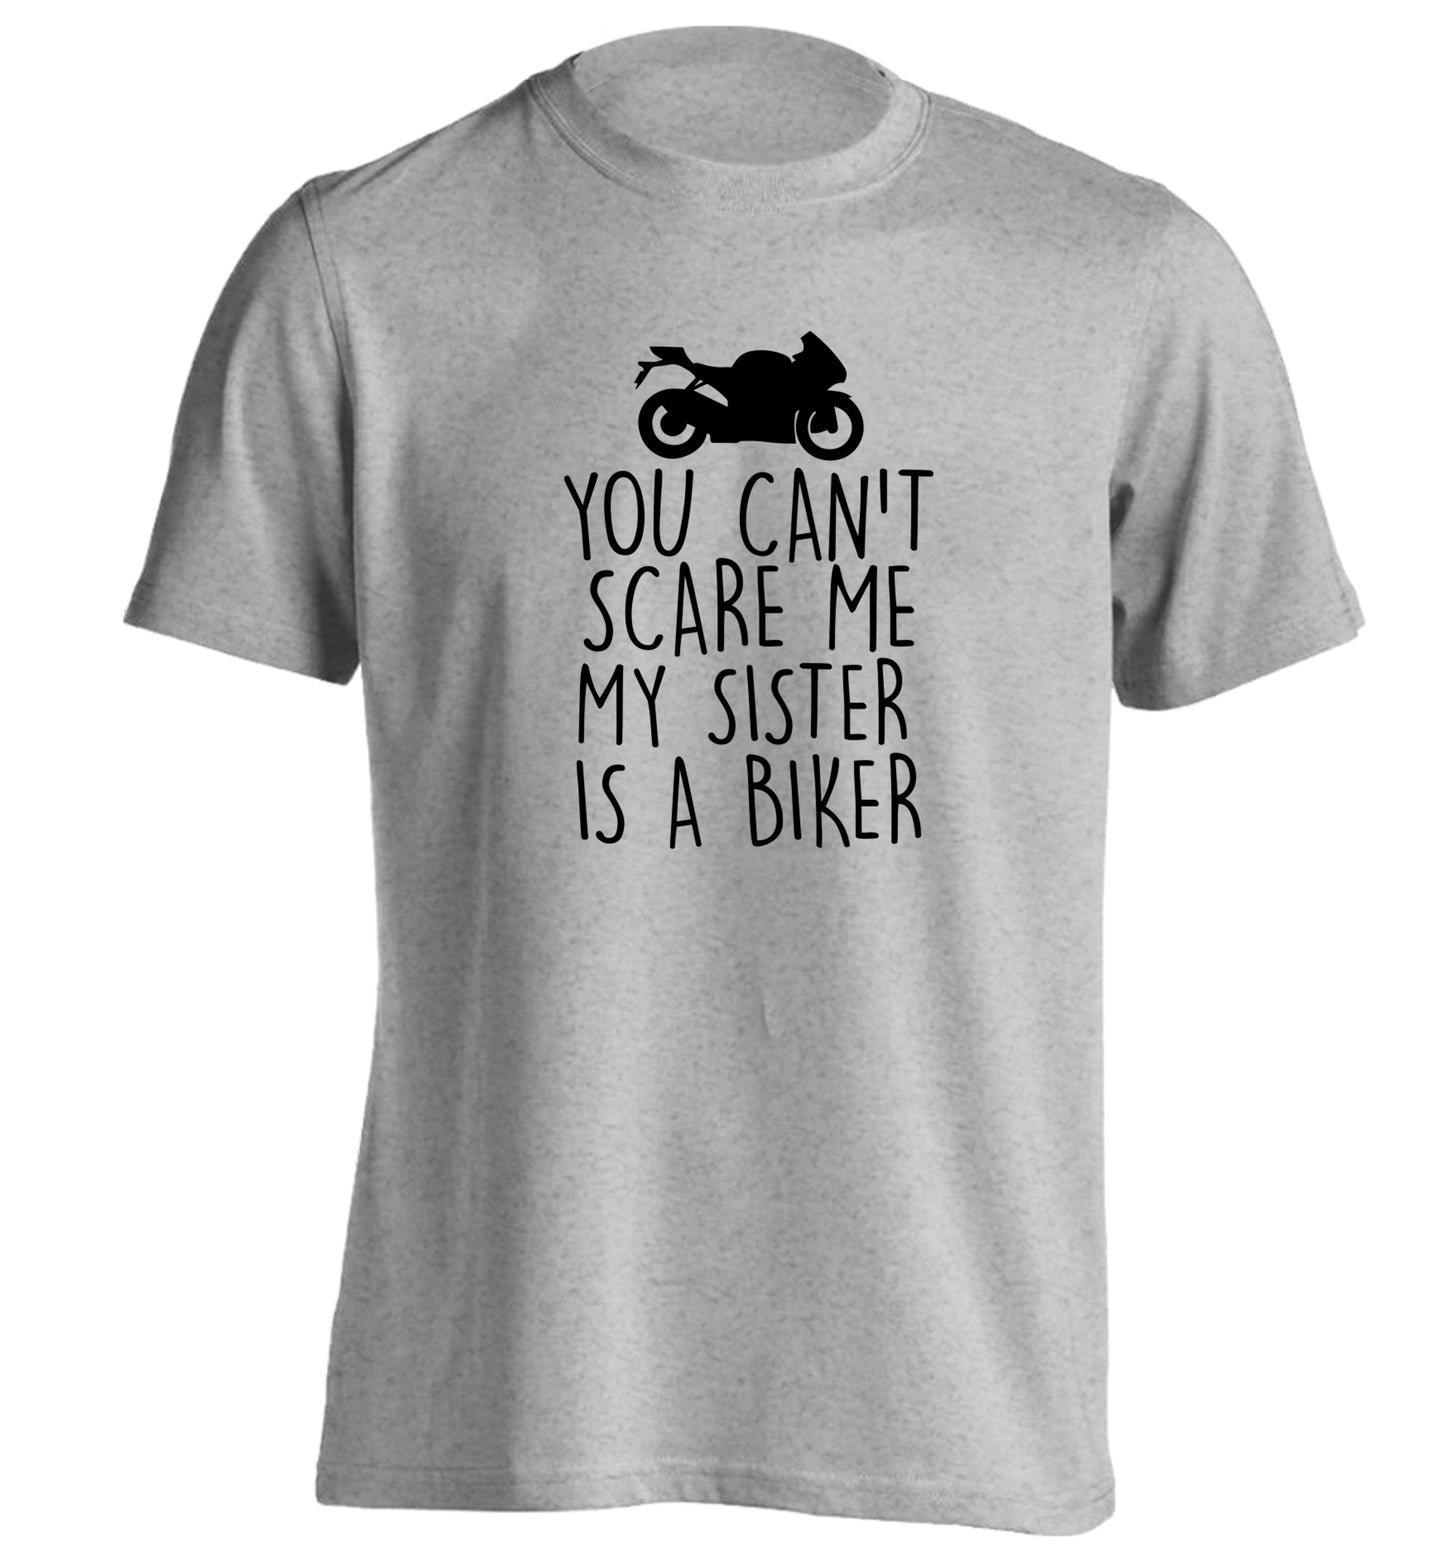 You can't scare me my sister is a biker adults unisex grey Tshirt 2XL